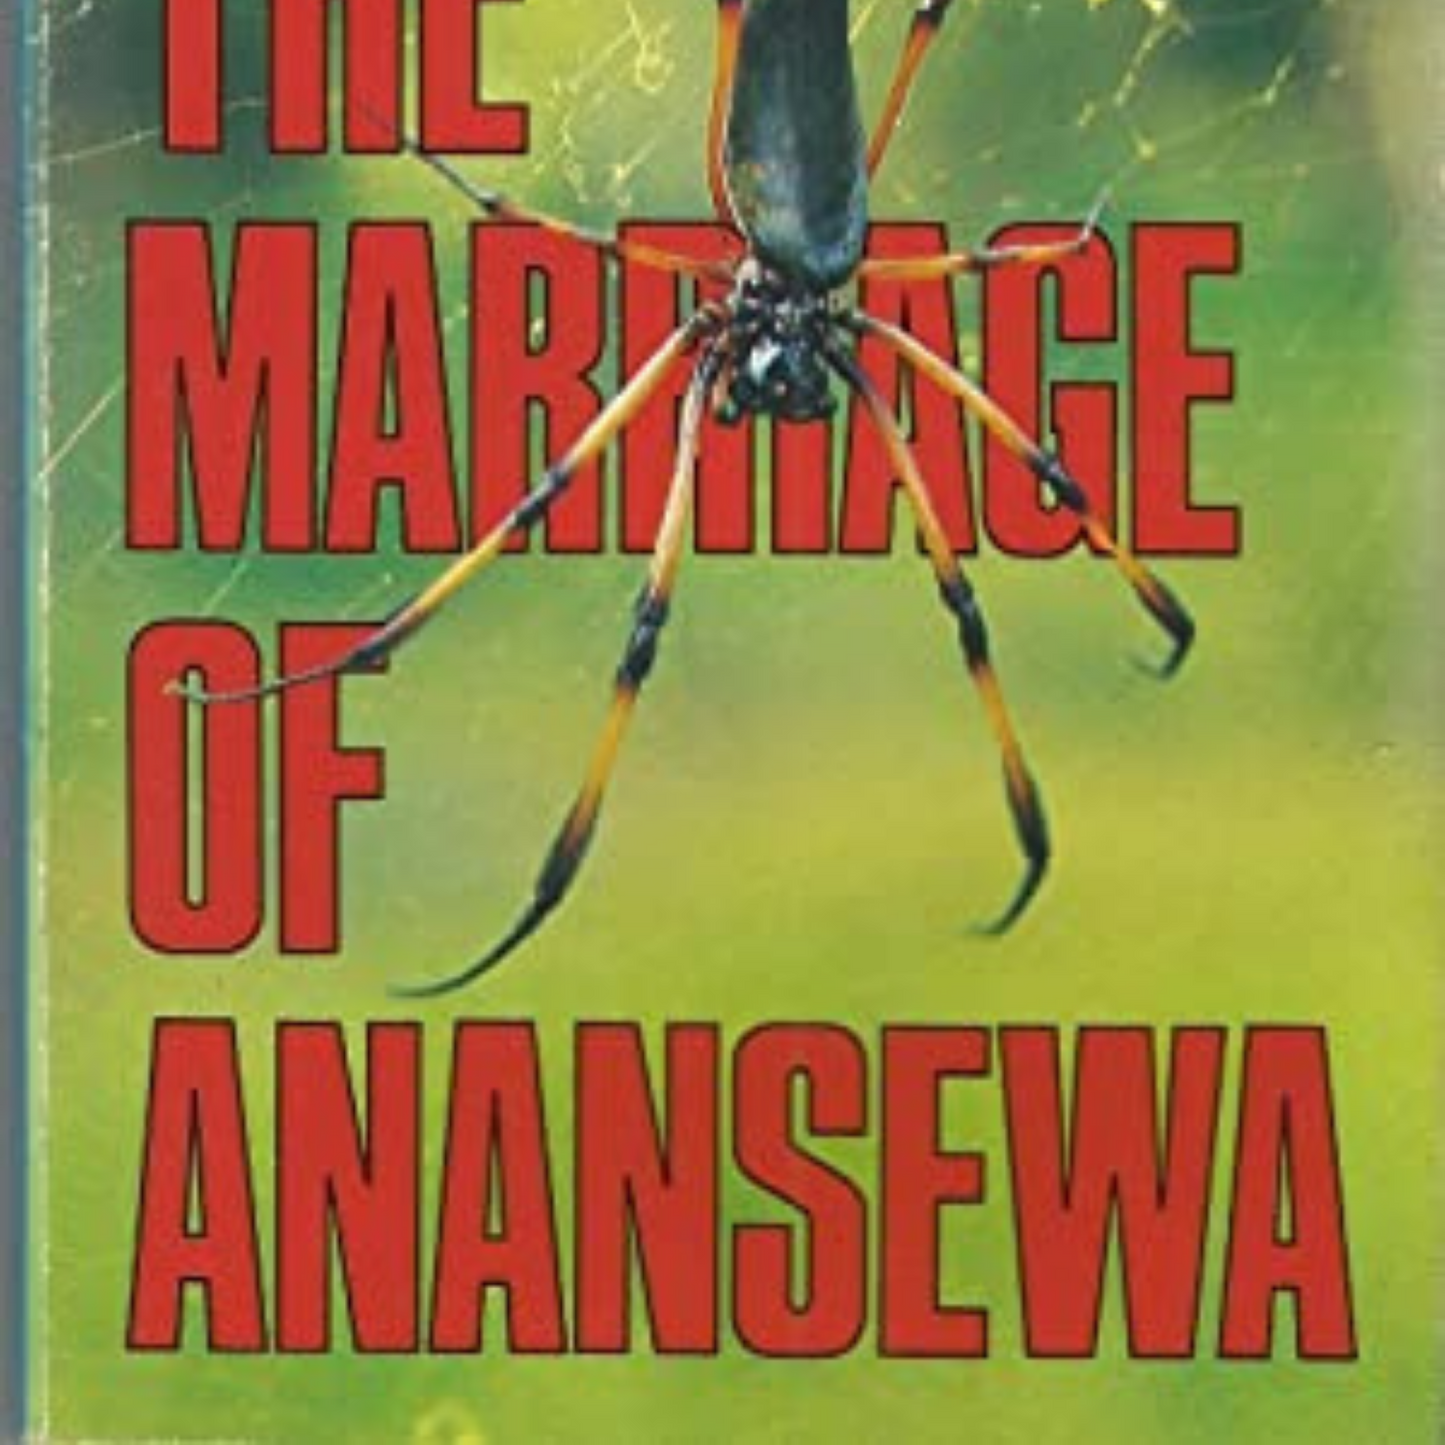 The Marriage of Anansewa